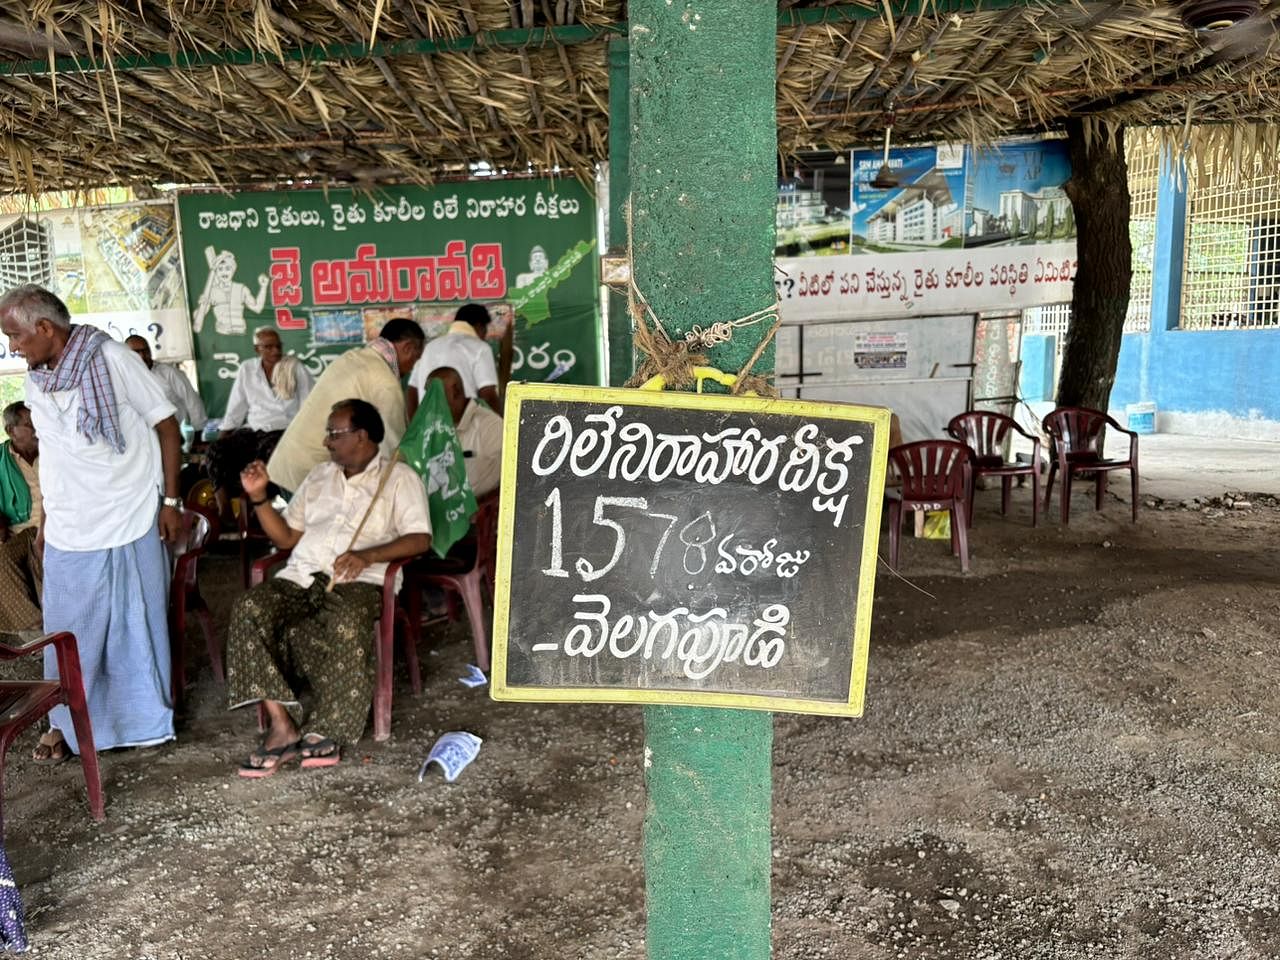 A protest site in Amaravati, the chalkboard denotes the number of days the farmers have been protesting for | Vandana Menon | ThePrint